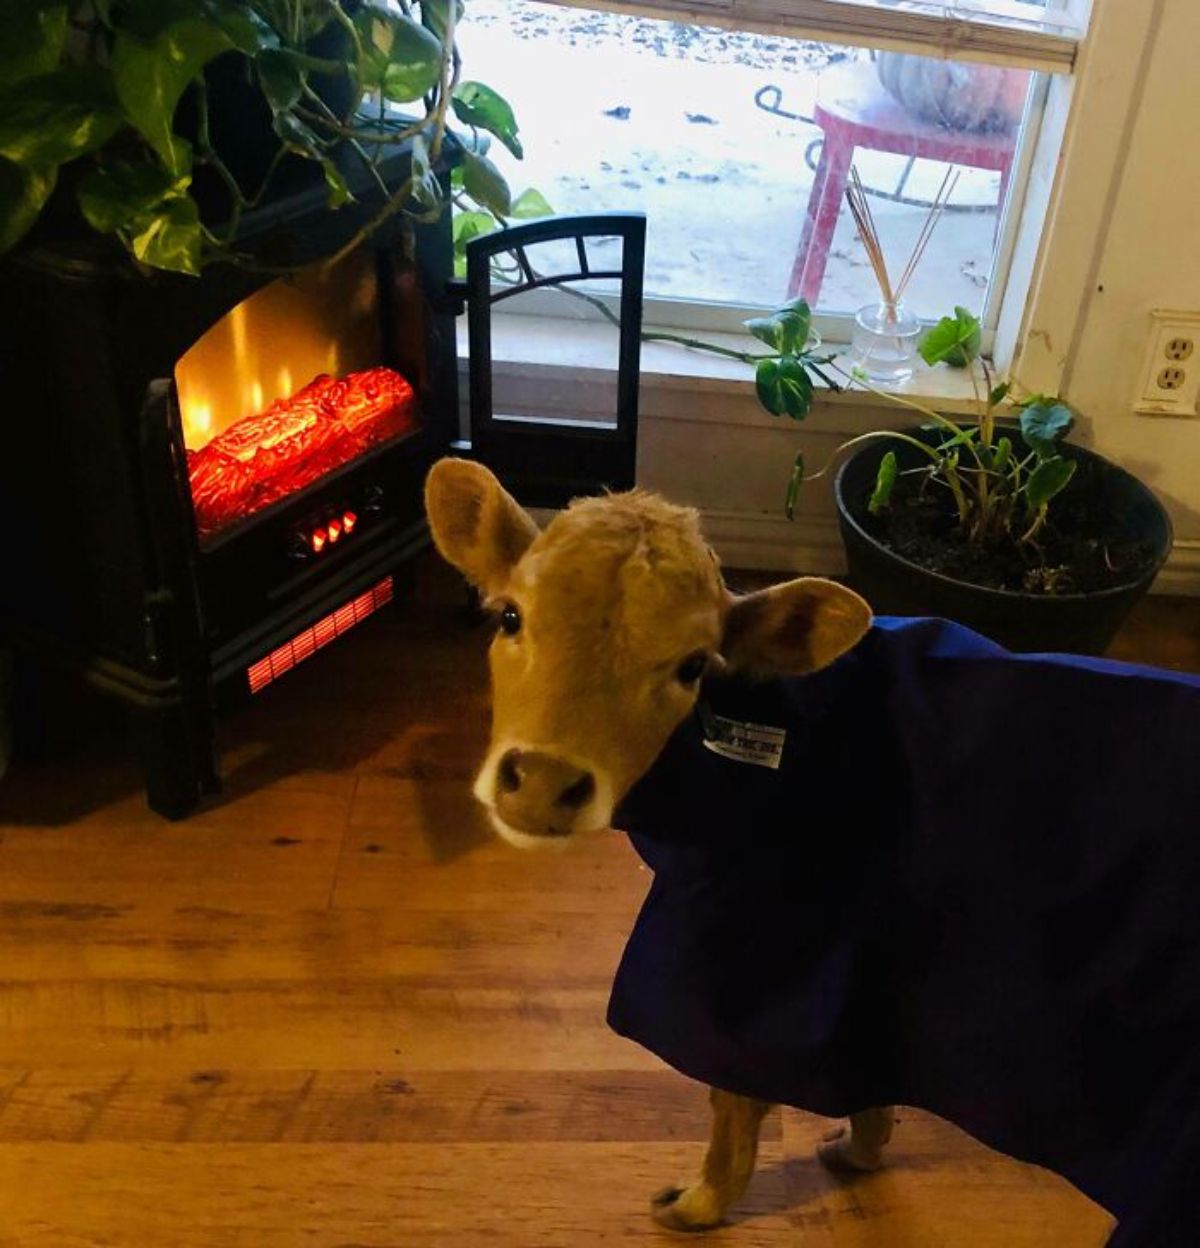 brown calf wearing a red sweater inside a house in front of a fireplace